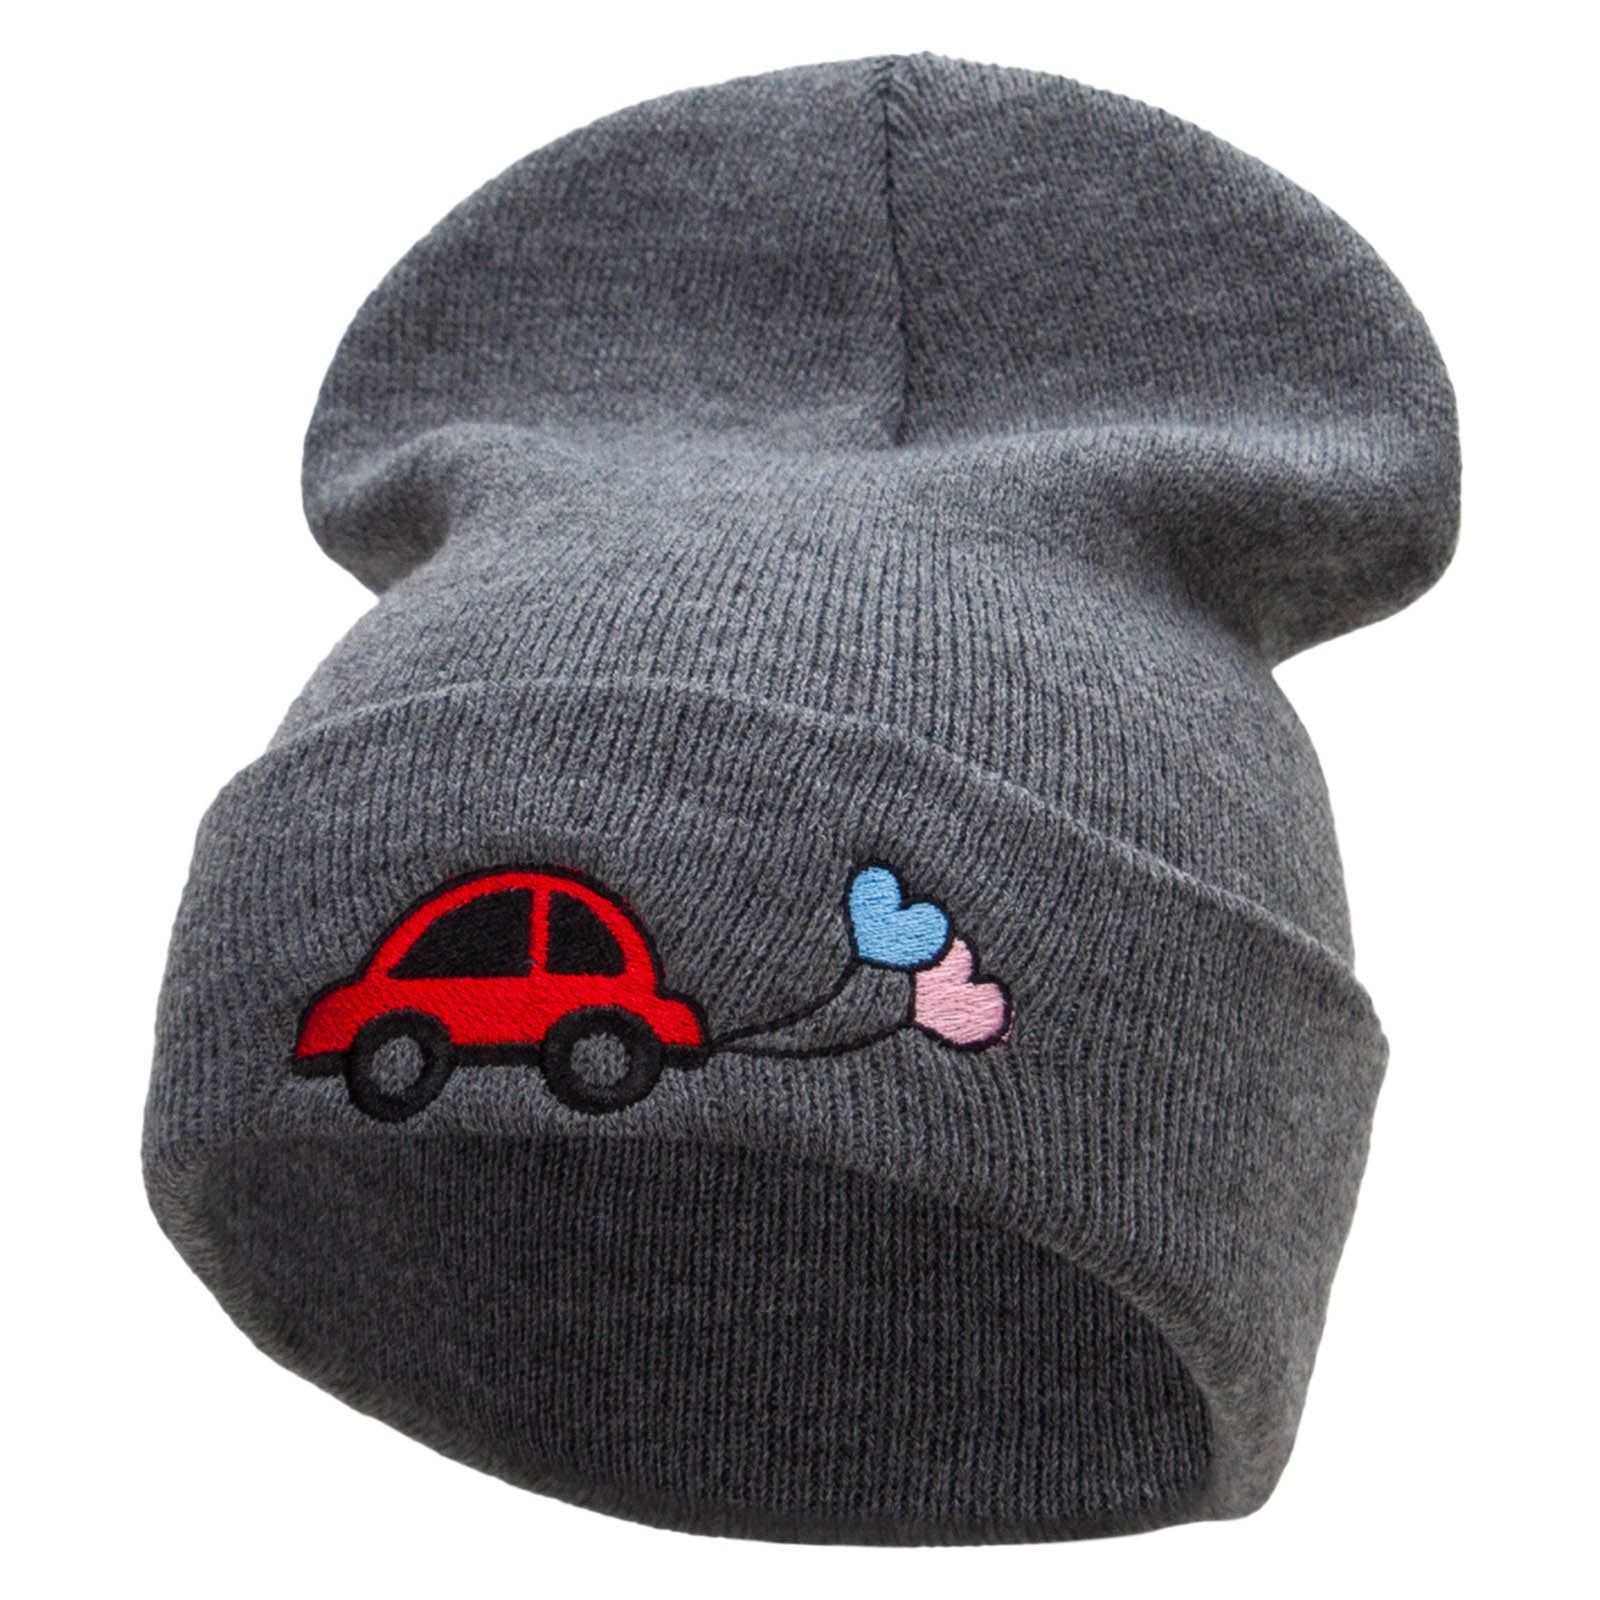 Car Wedding Balloons Embroidered 12 Inch Long Knitted Beanie - Dk Grey OSFM